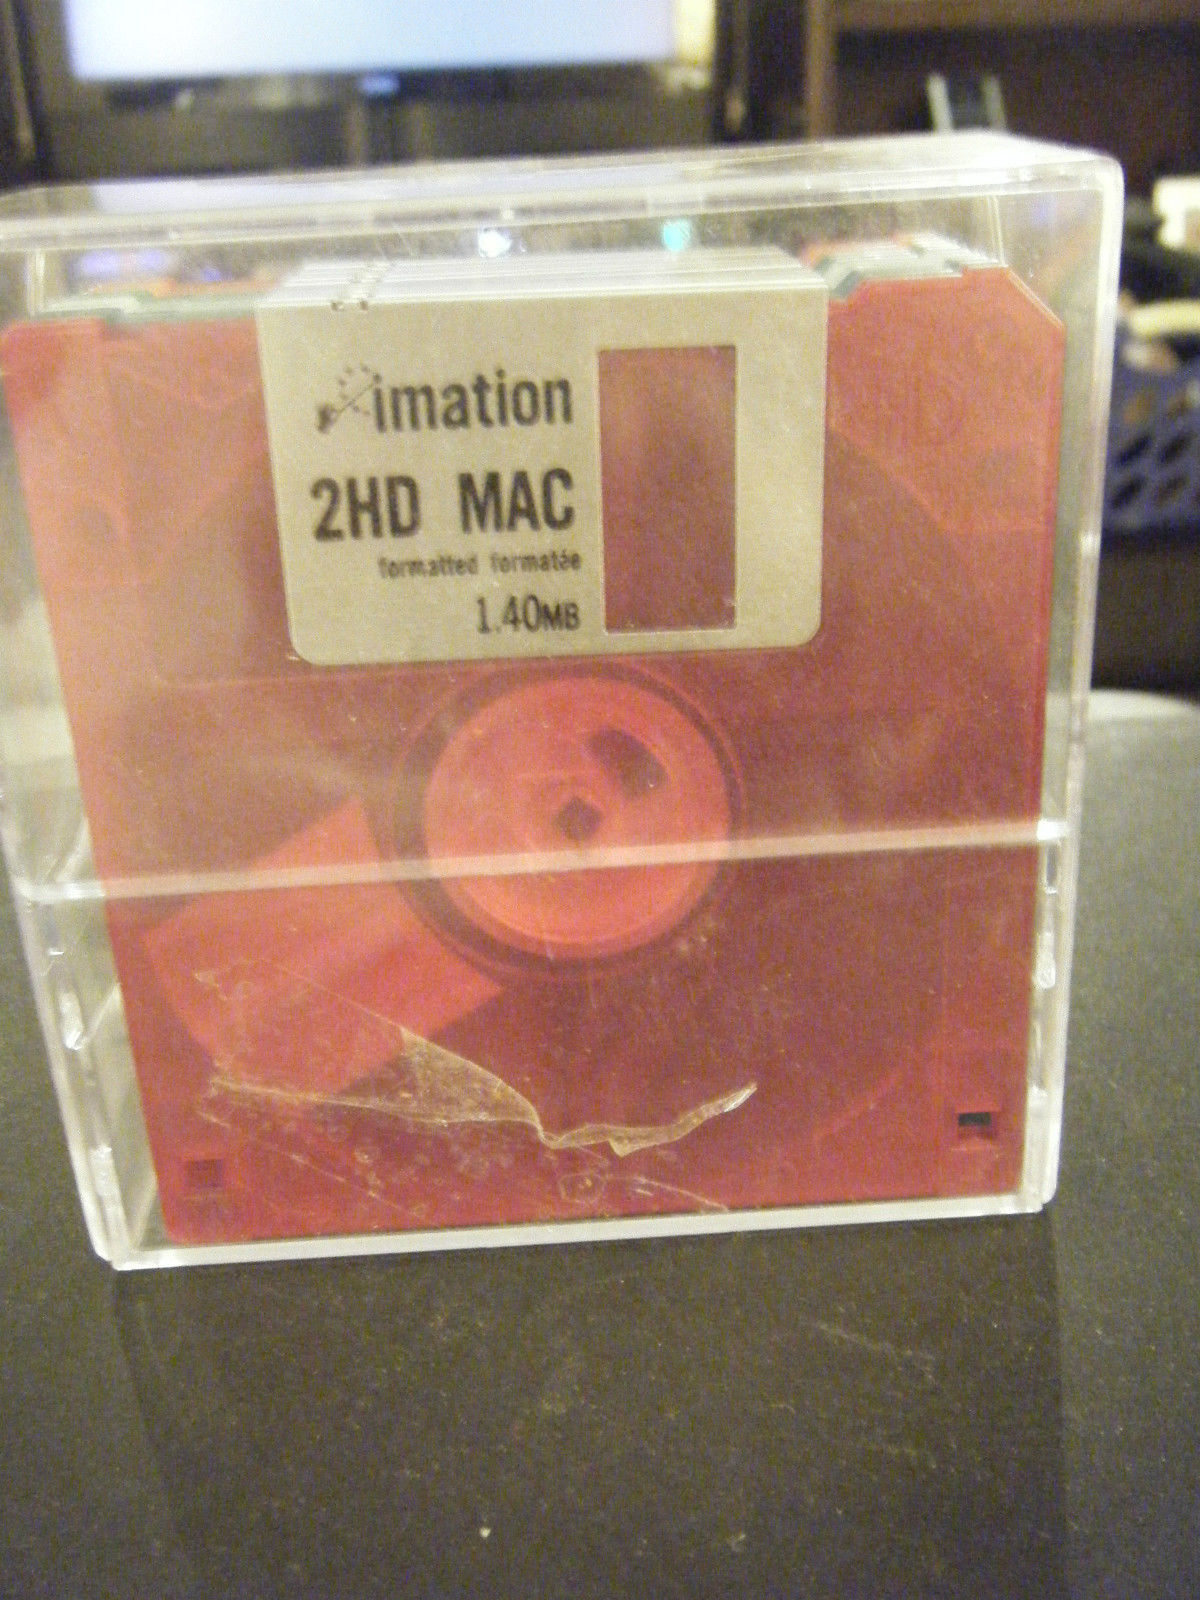 Pack of 10 Imation 2HD Formatted 1.40MB Diskettes for MAC - $15.78